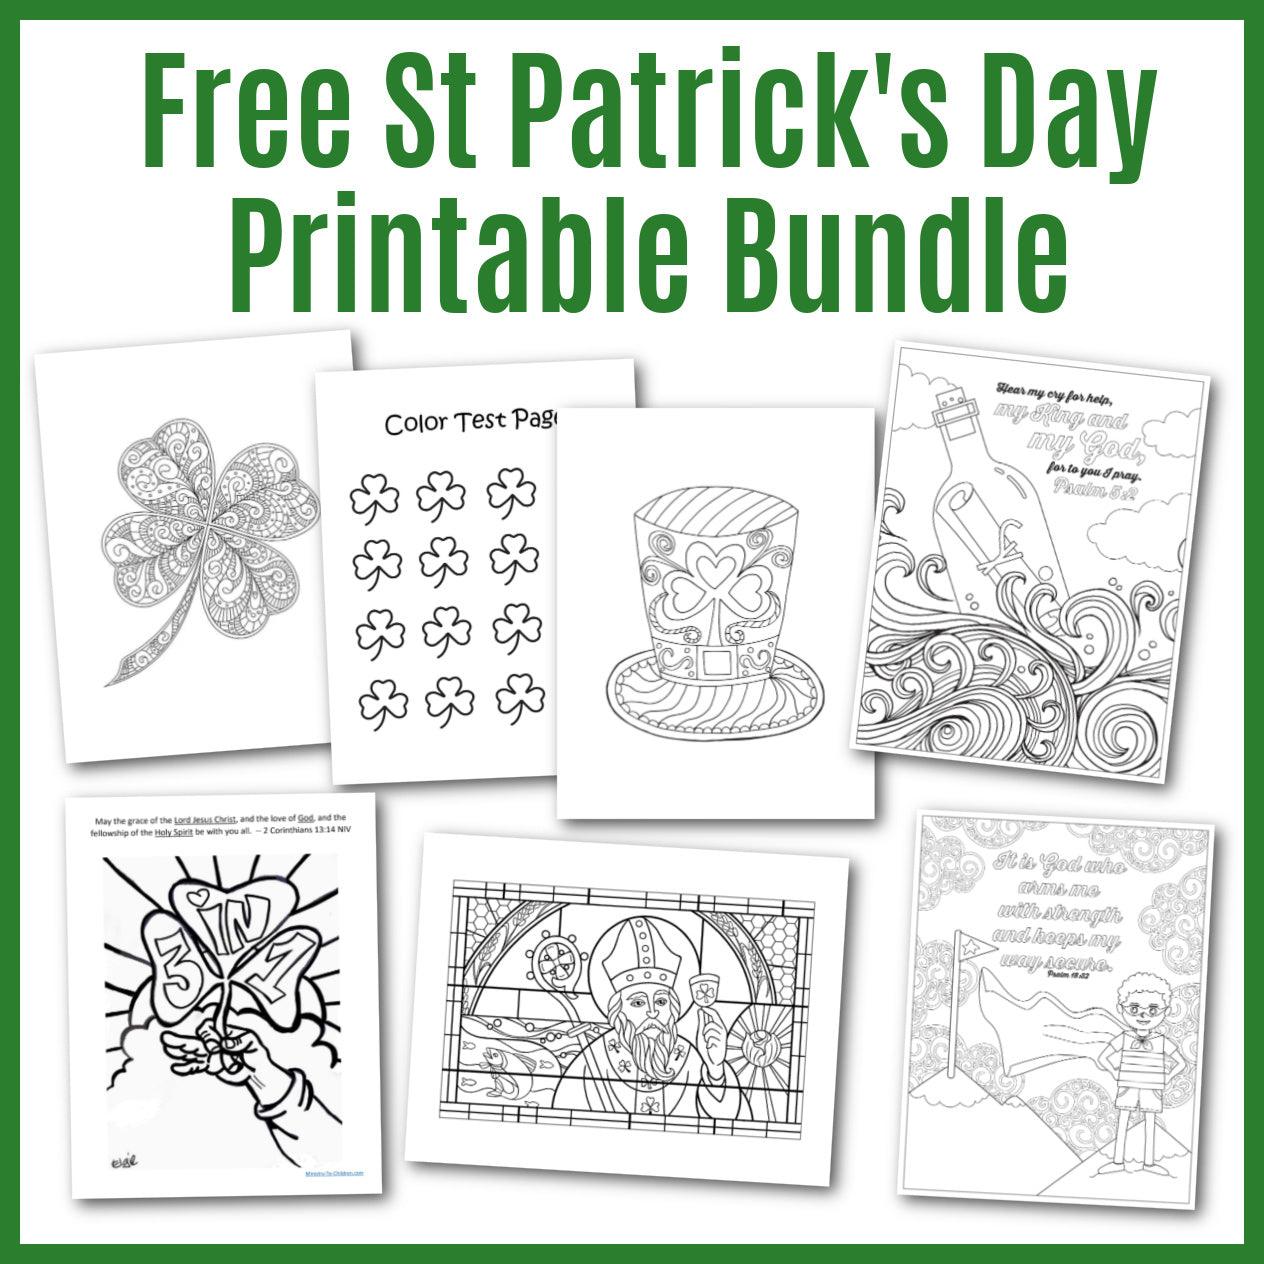 St. Patrick's Day Printable Bundle (Free) Download - Sunday School Store 